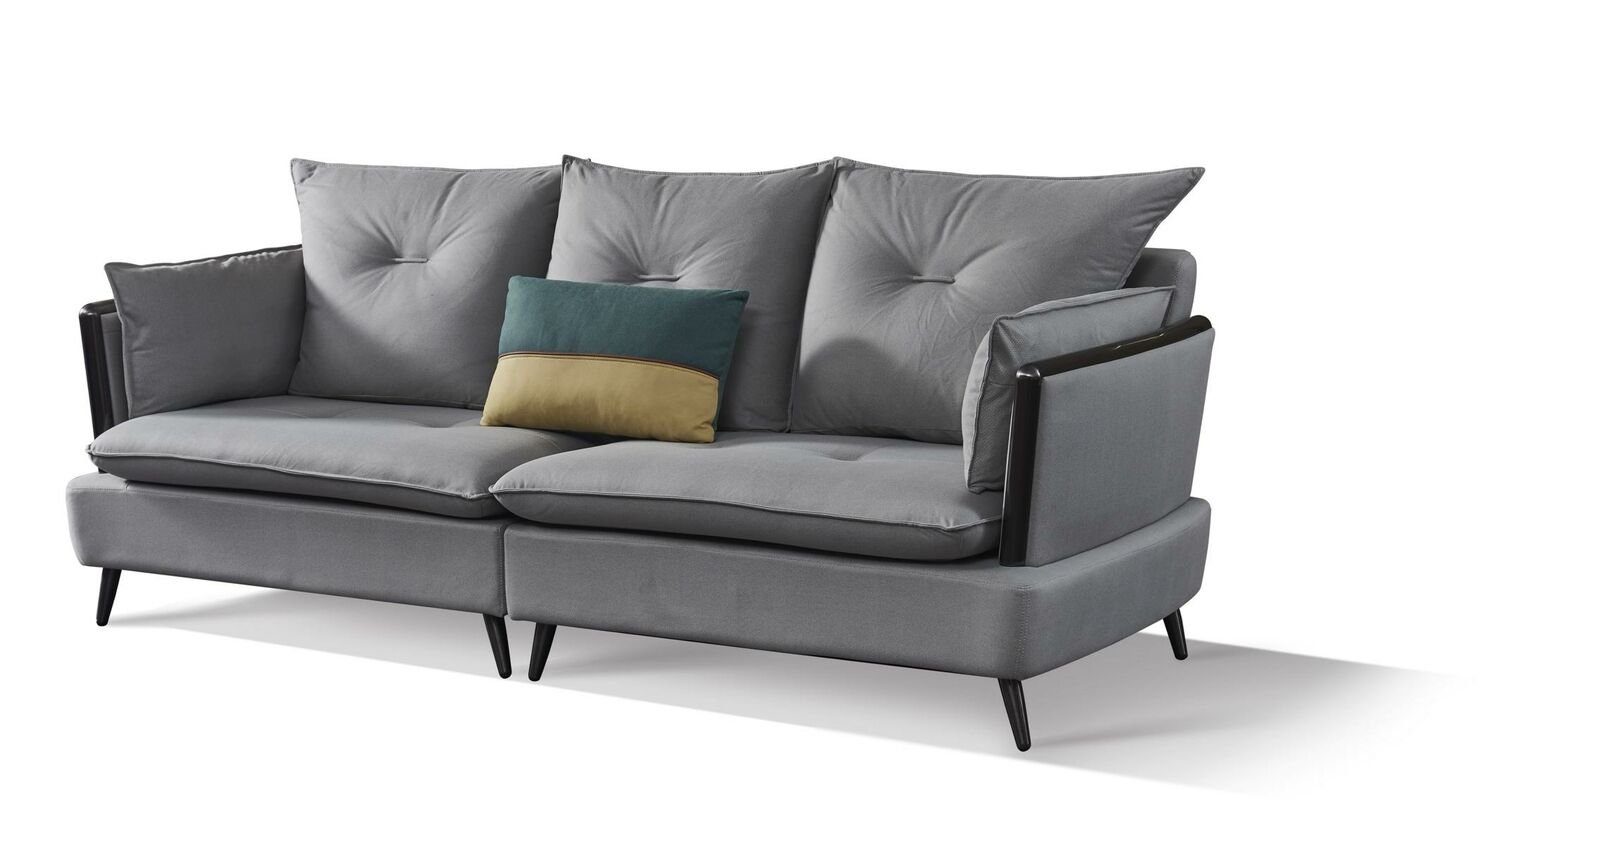 Europe Couchen, Sitzer Couch Textil 3 Polster Made Moderne in Sofa Sofa JVmoebel Sofas